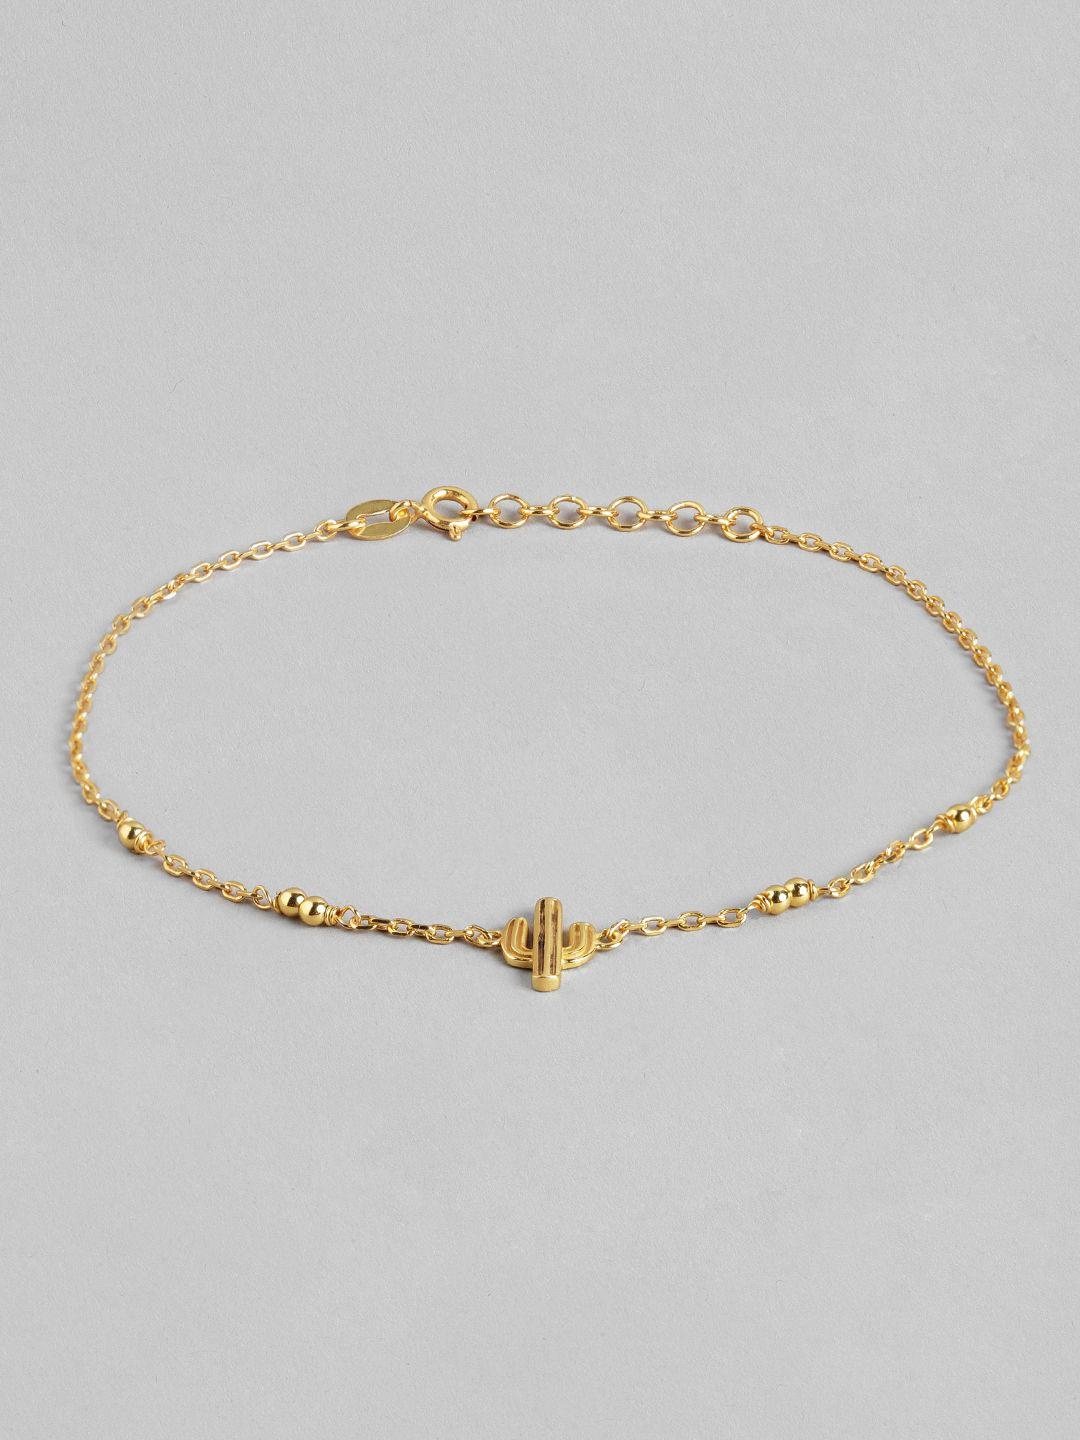 carlton-london-gold-plated-handcrafted-anklet